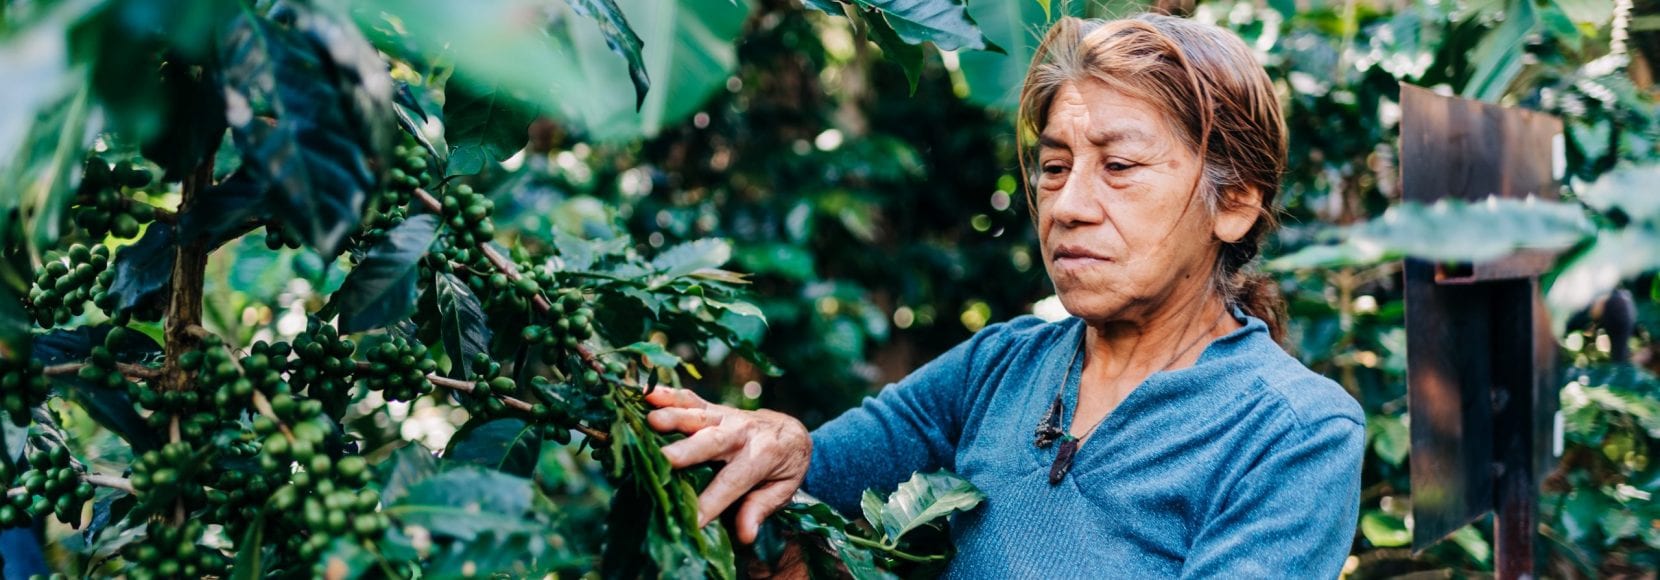 Woman picking coffee beans off the vine